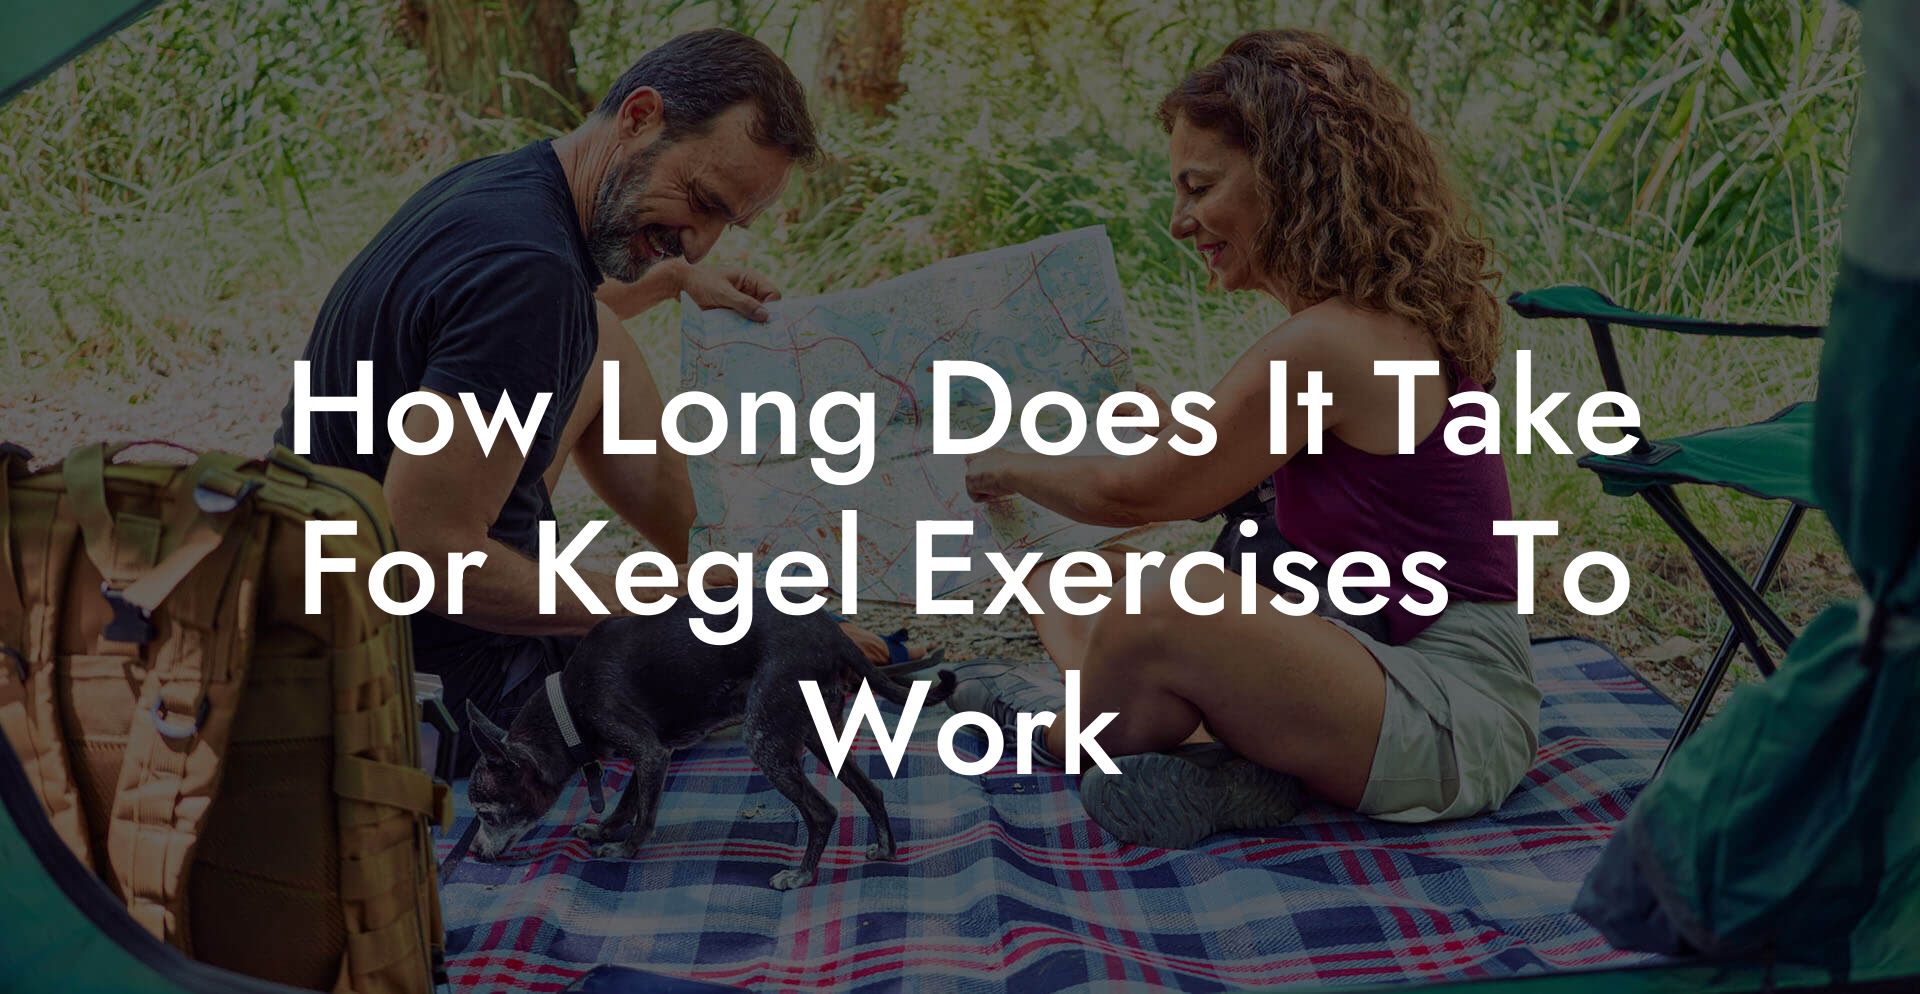 How Long Does It Take For Kegel Exercises To Work